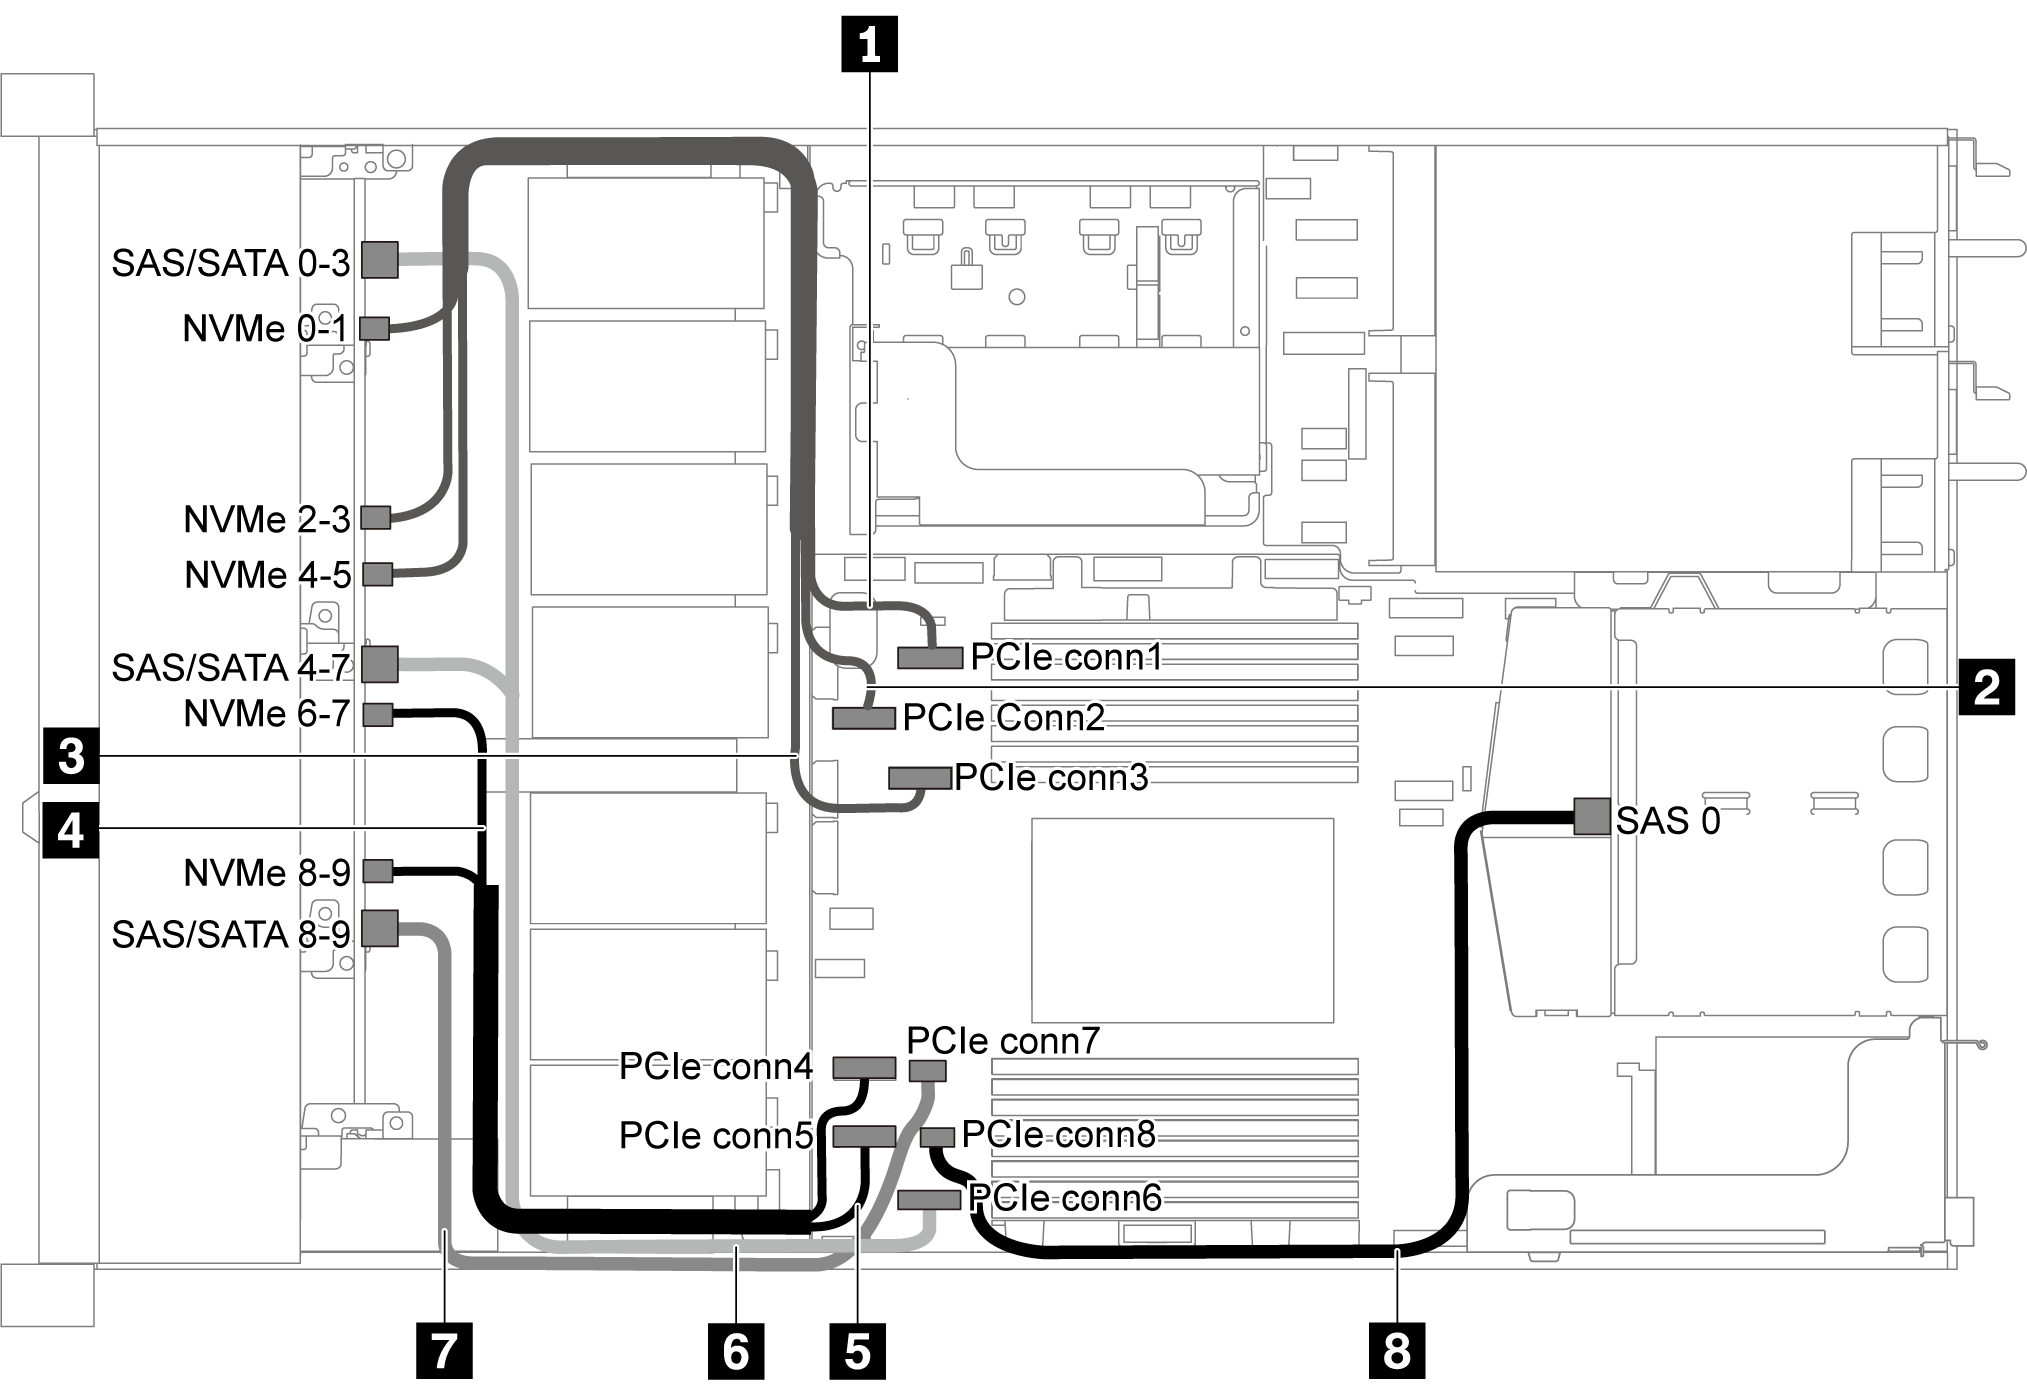 Cable routing for server model with ten 2.5-inch SATA/NVMe drives and rear SAS/SATA drive assembly